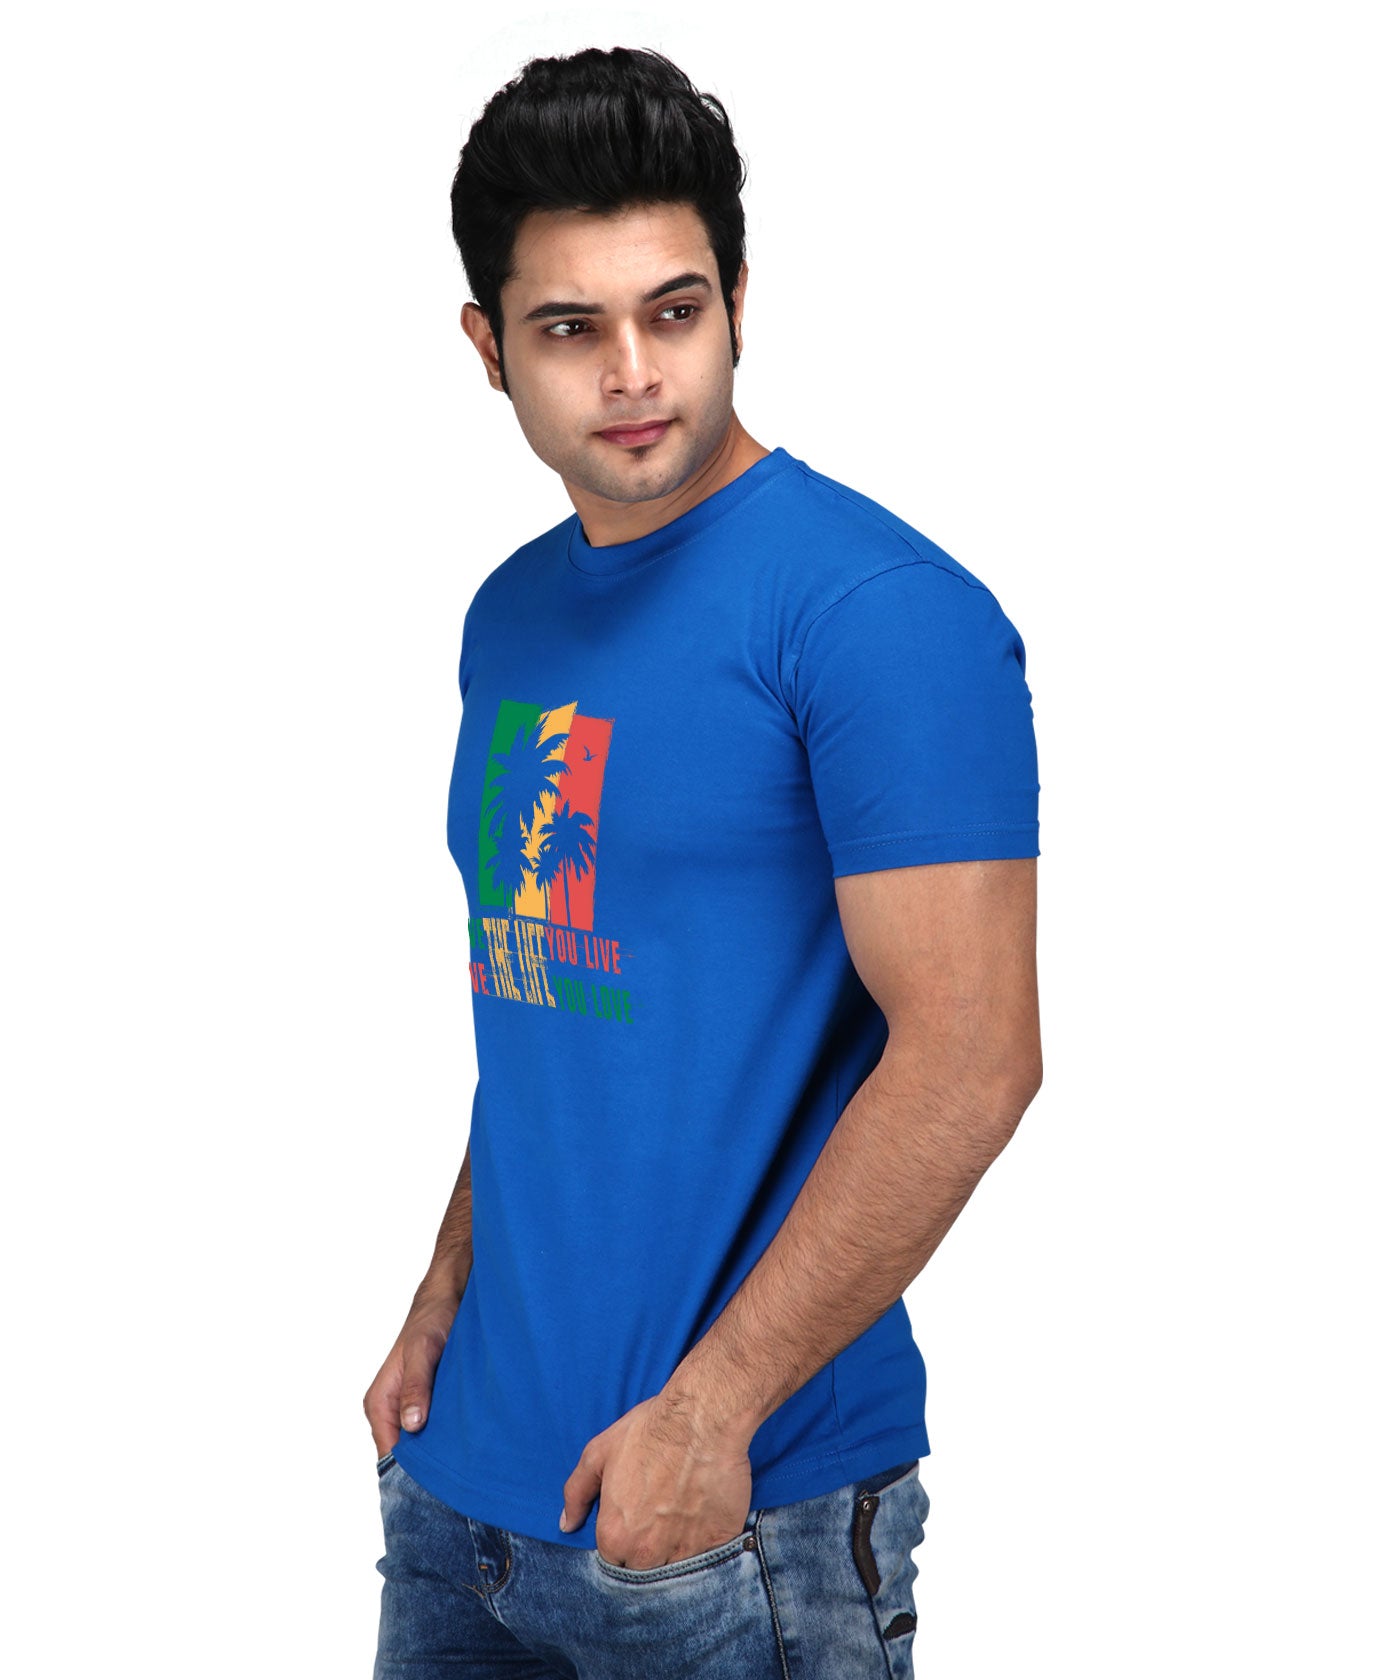 Love Life - Premium Round Neck Cotton Tees for Men - Black And Electric Blue